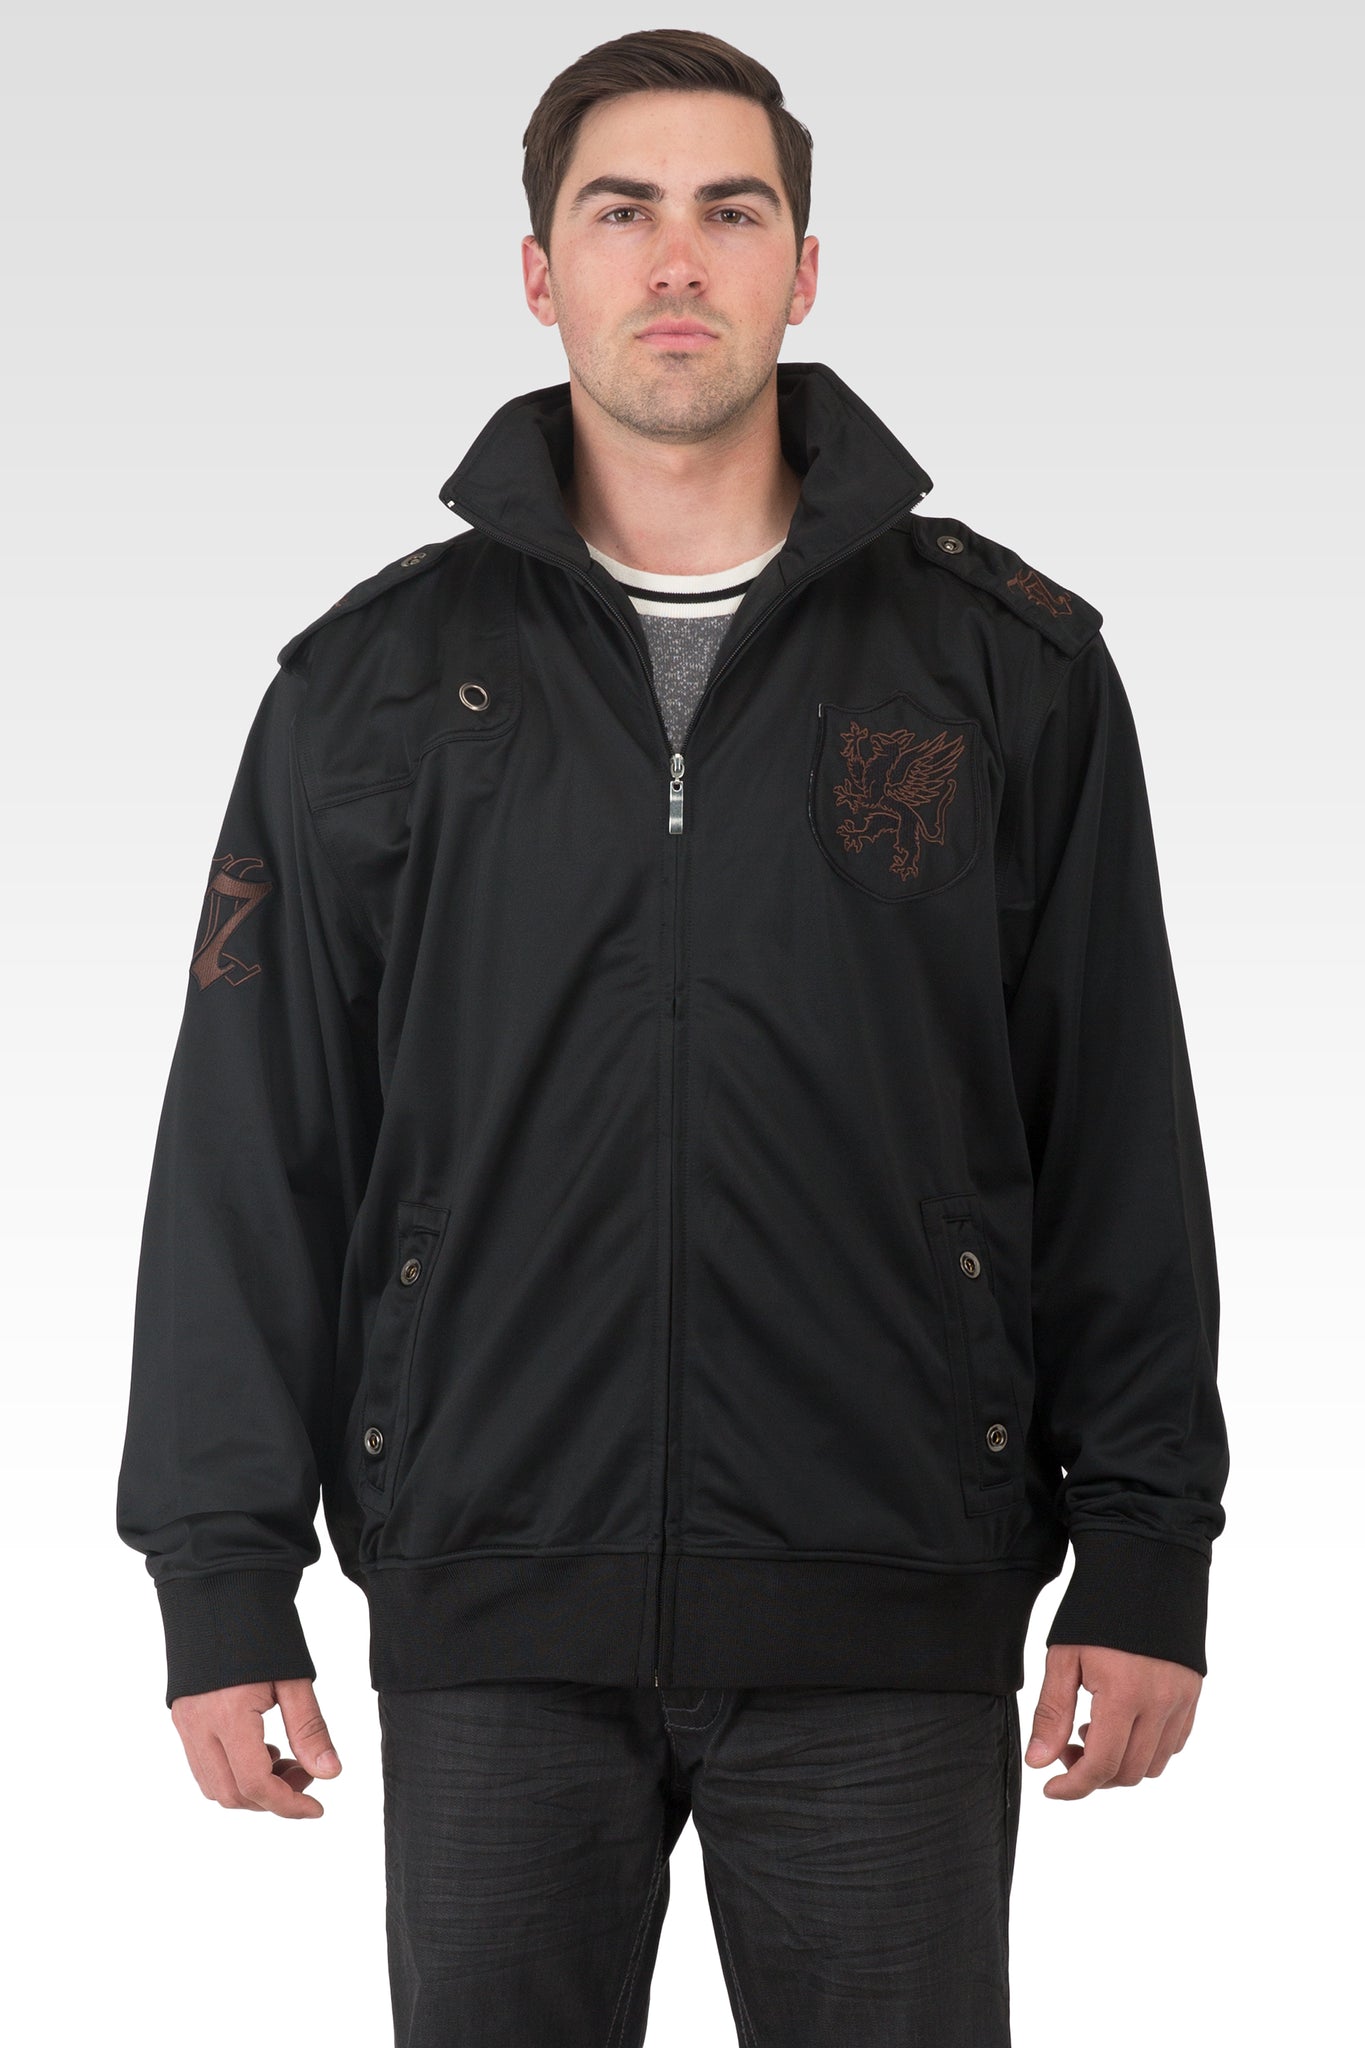 Men's Black Poly Performance Full Zip Track Jacket With Brown Embroidery Patches